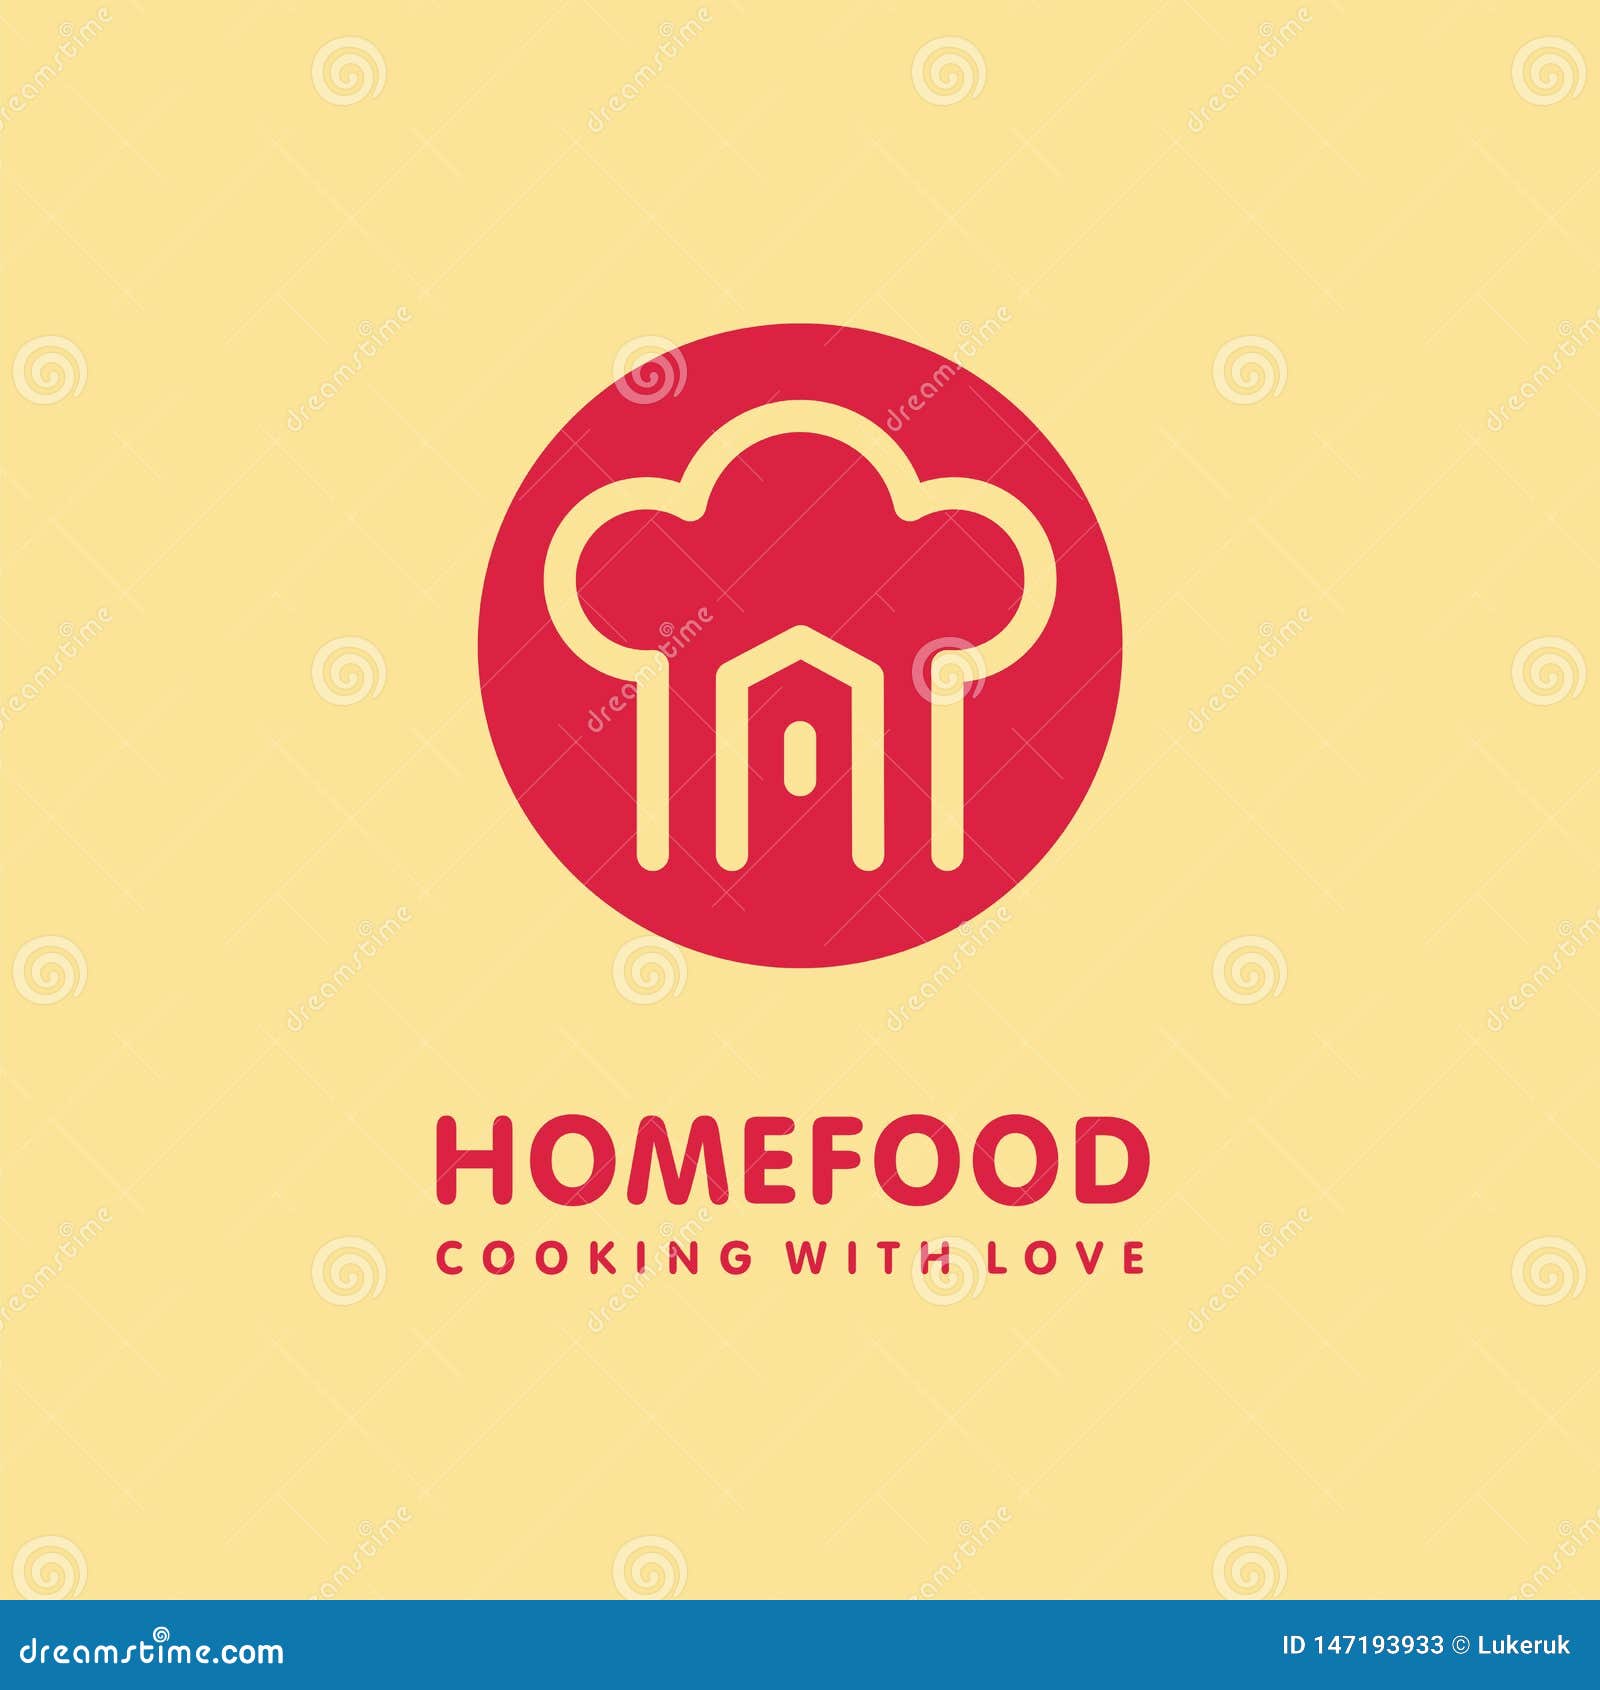 Home Cooking Food Logo Design Stock Vector Illustration Of